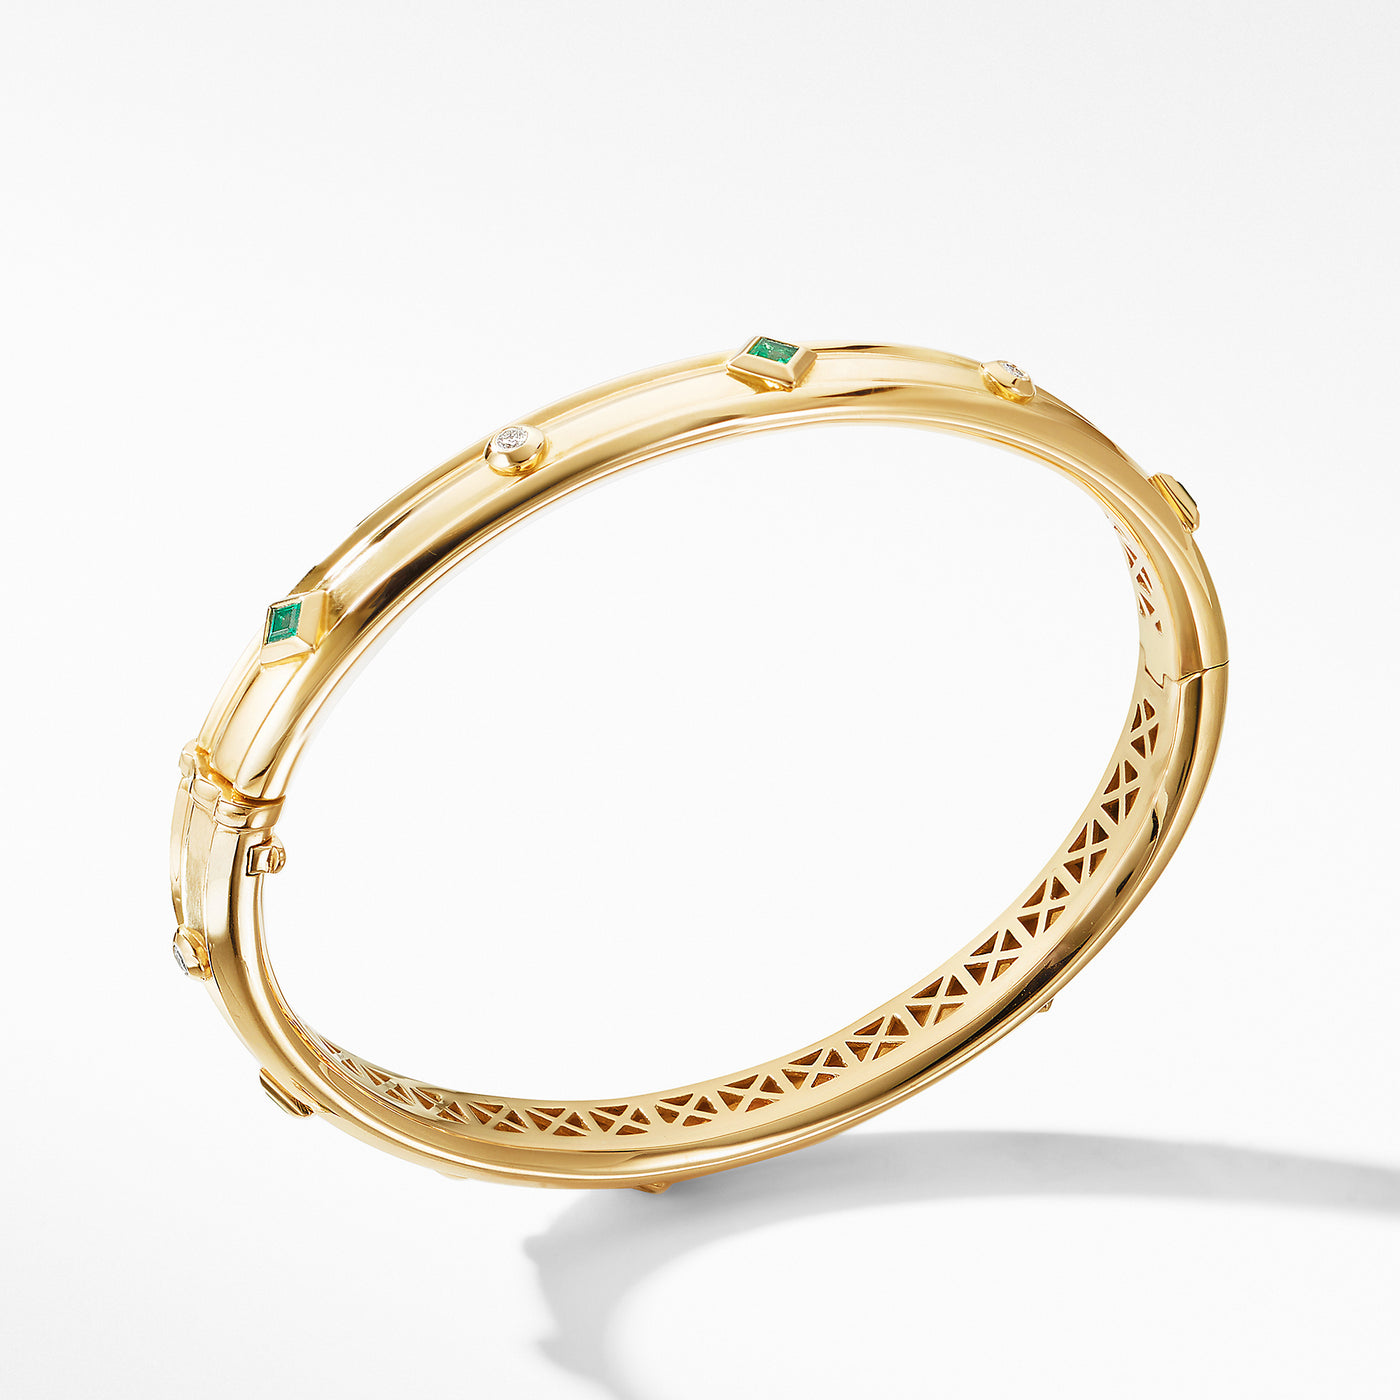 Modern Renaissance Bangle Bracelet in 18K Yellow Gold with Emeralds and Diamonds\, 8mm